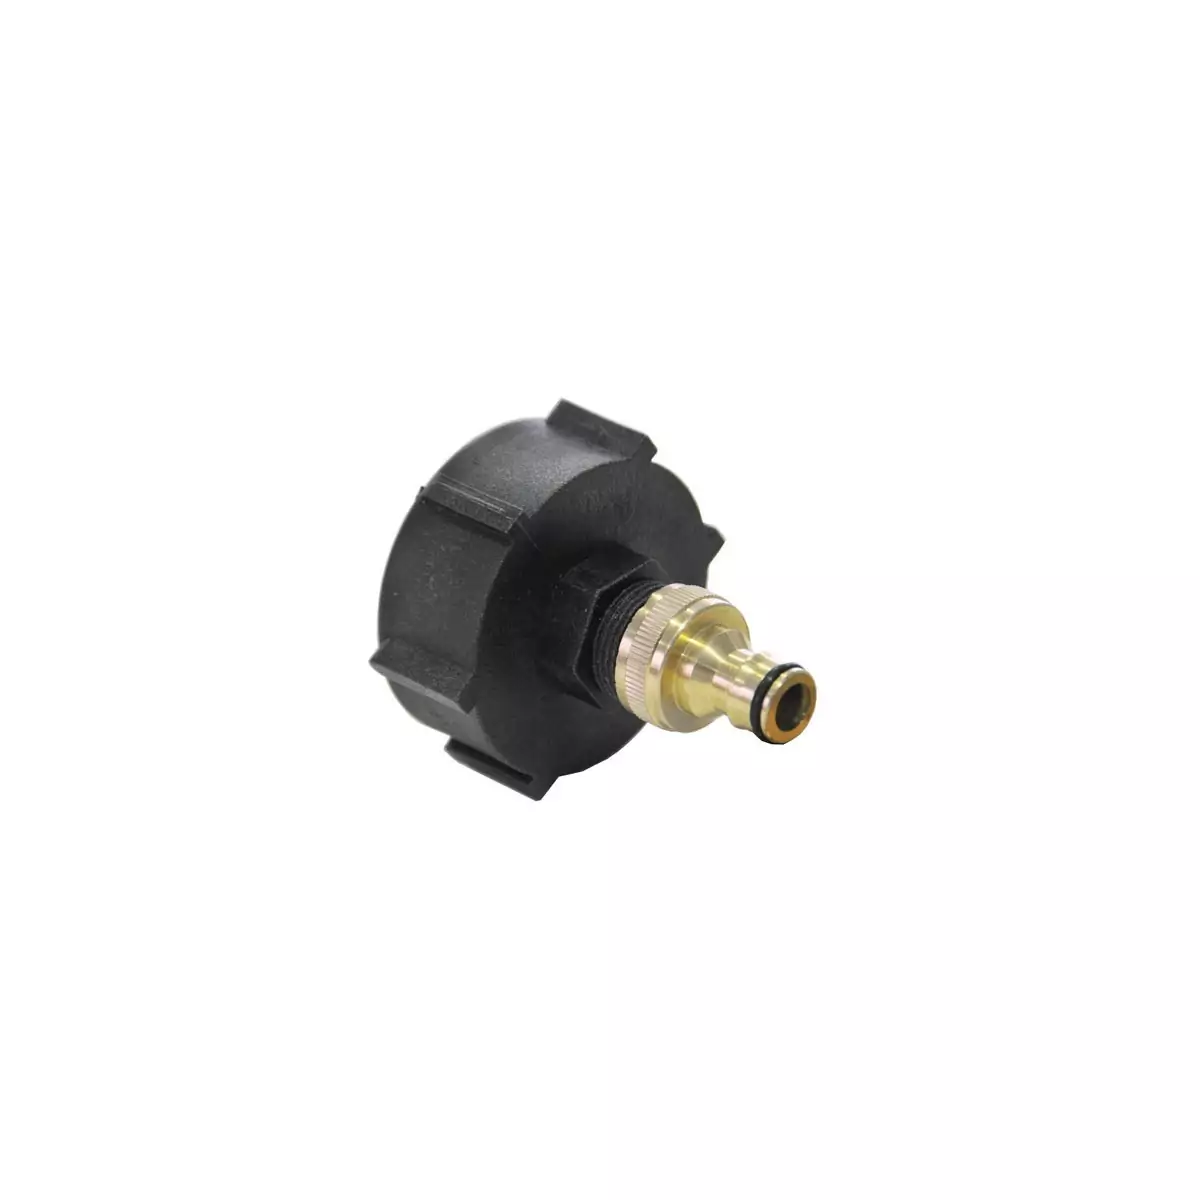 Product sheet Connection S60x6 with male end brass quality pro